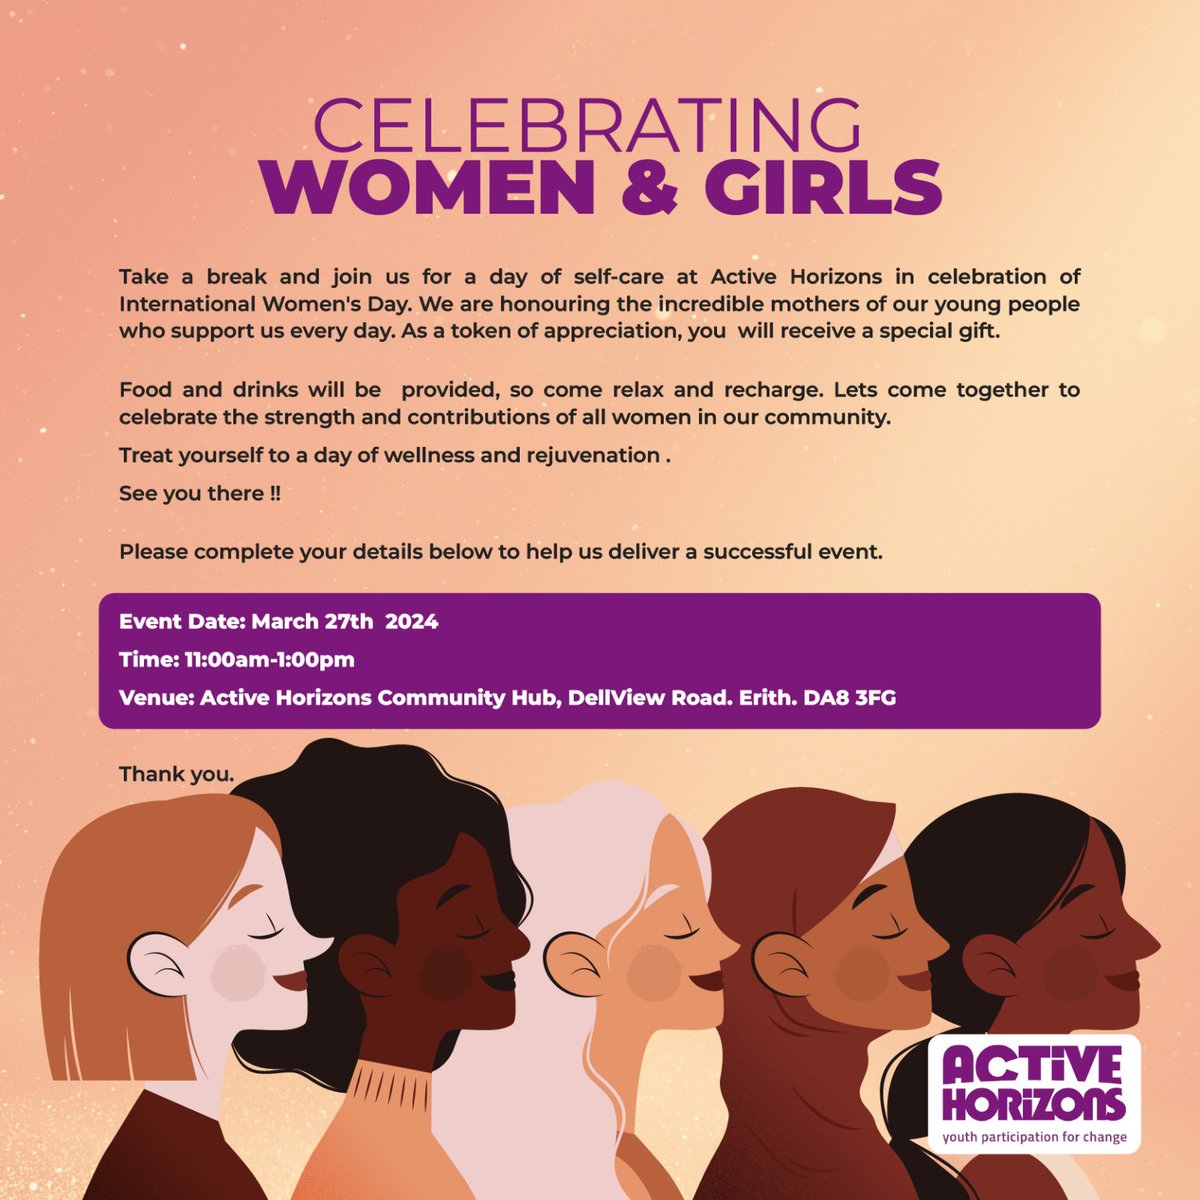 Happy International Women’s Day. We would like to celebrate all our female members on 27 March for a special self-care event at our community Hub. For further information visit our website activehorizons.org